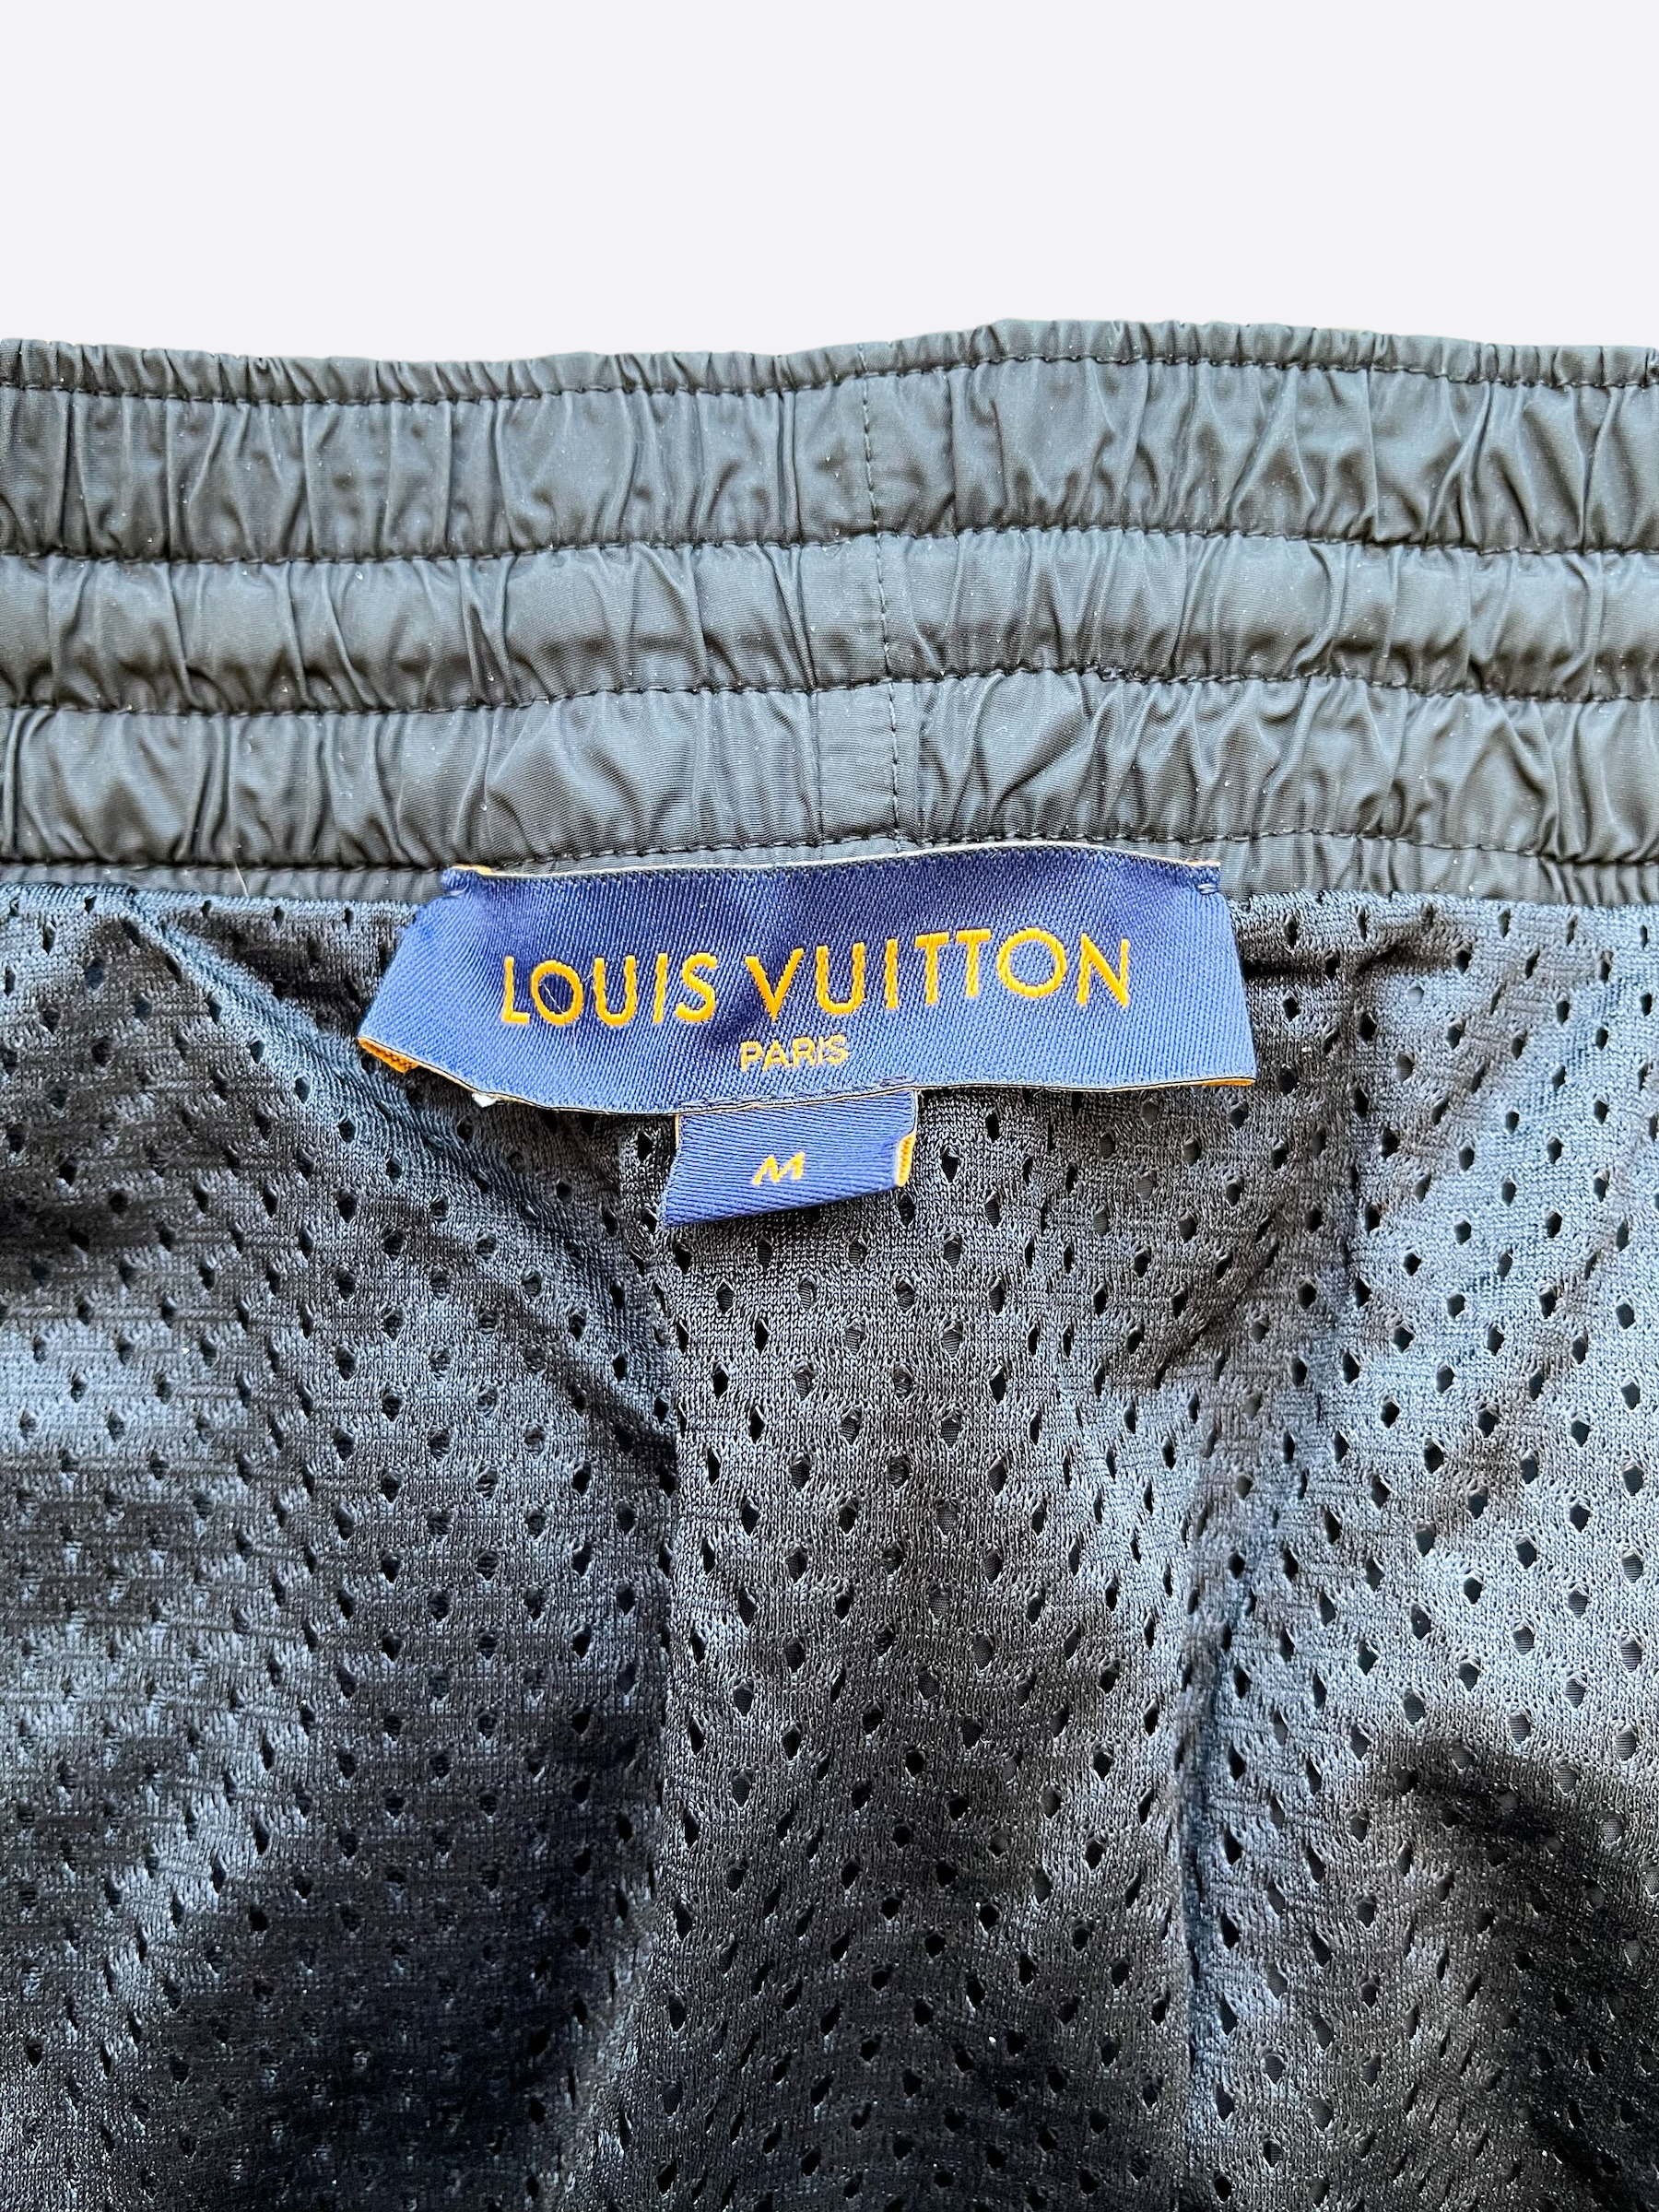 Louis Vuitton Water Monogram Board Shorts, Black, S (Stock Confirmation Required)